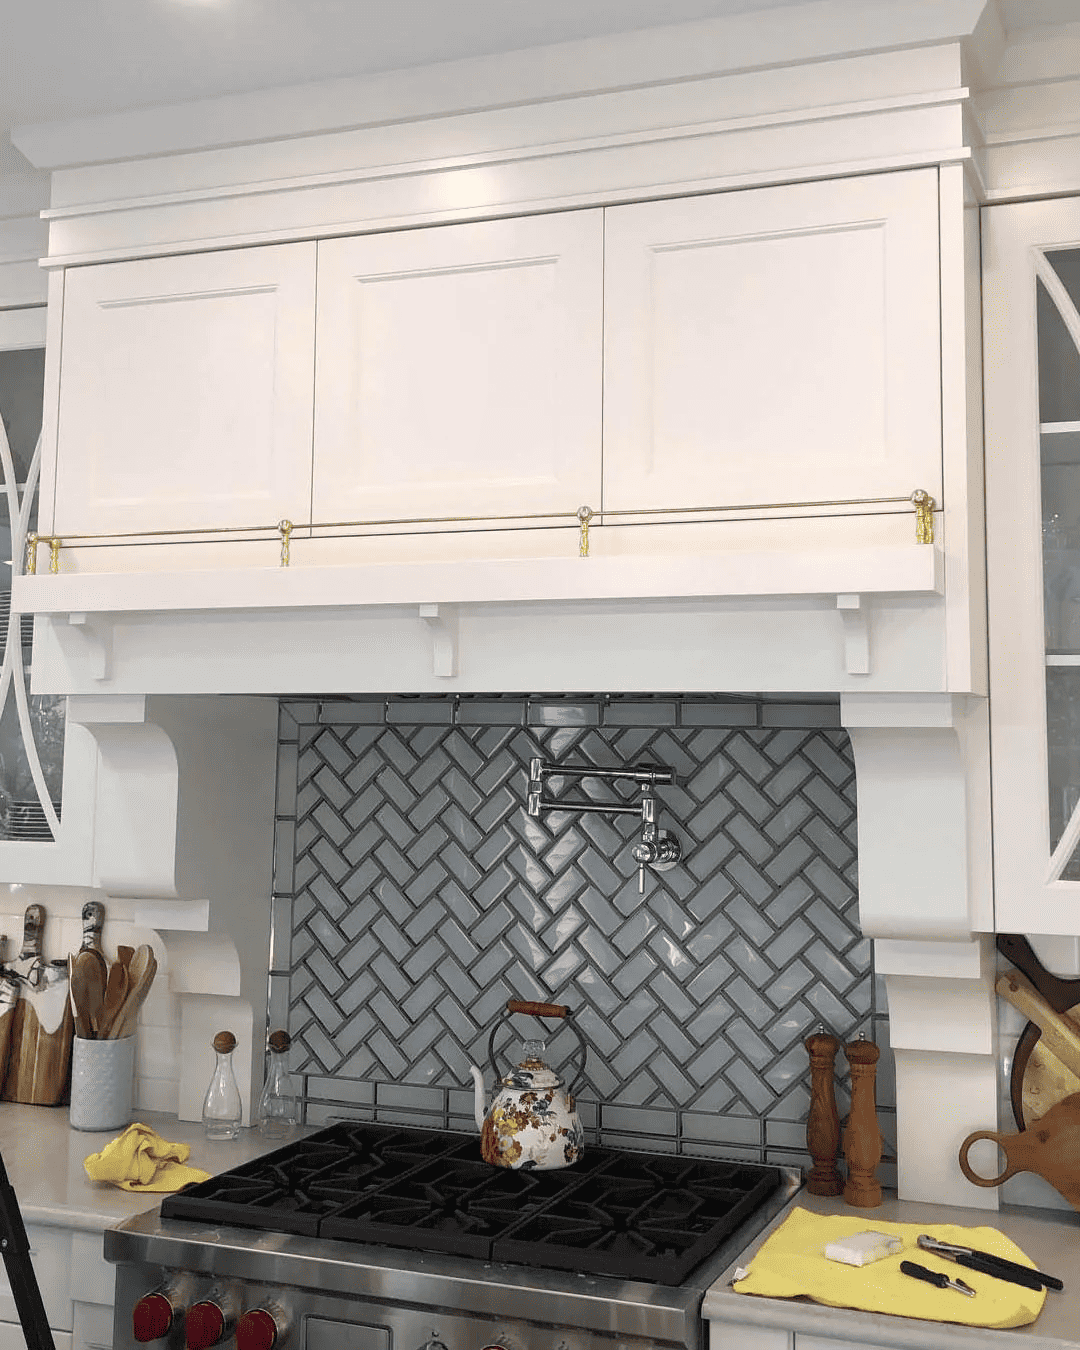 Paxton Hardware image of kitchen vent hood with decorative brass gallery rail